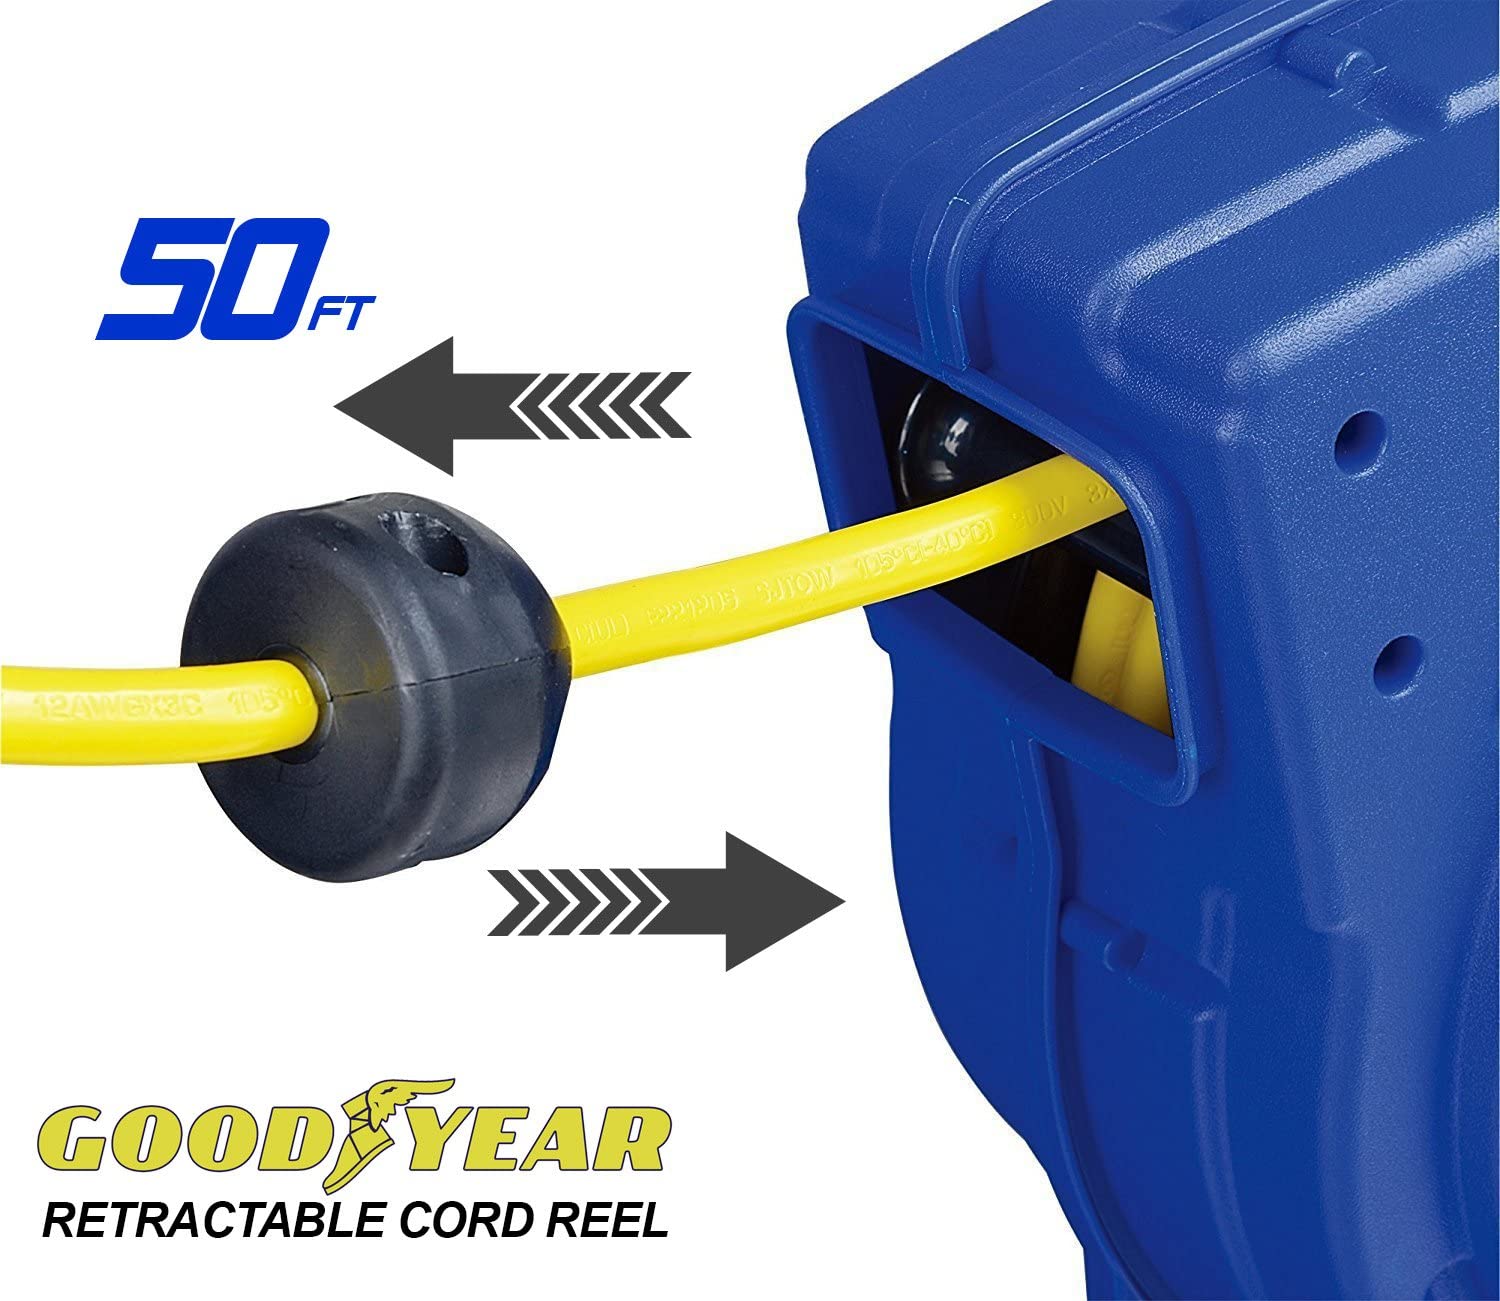 Goodyear 16 AWG x 50' 15A Mountable Retractable Extension Cord Reel New